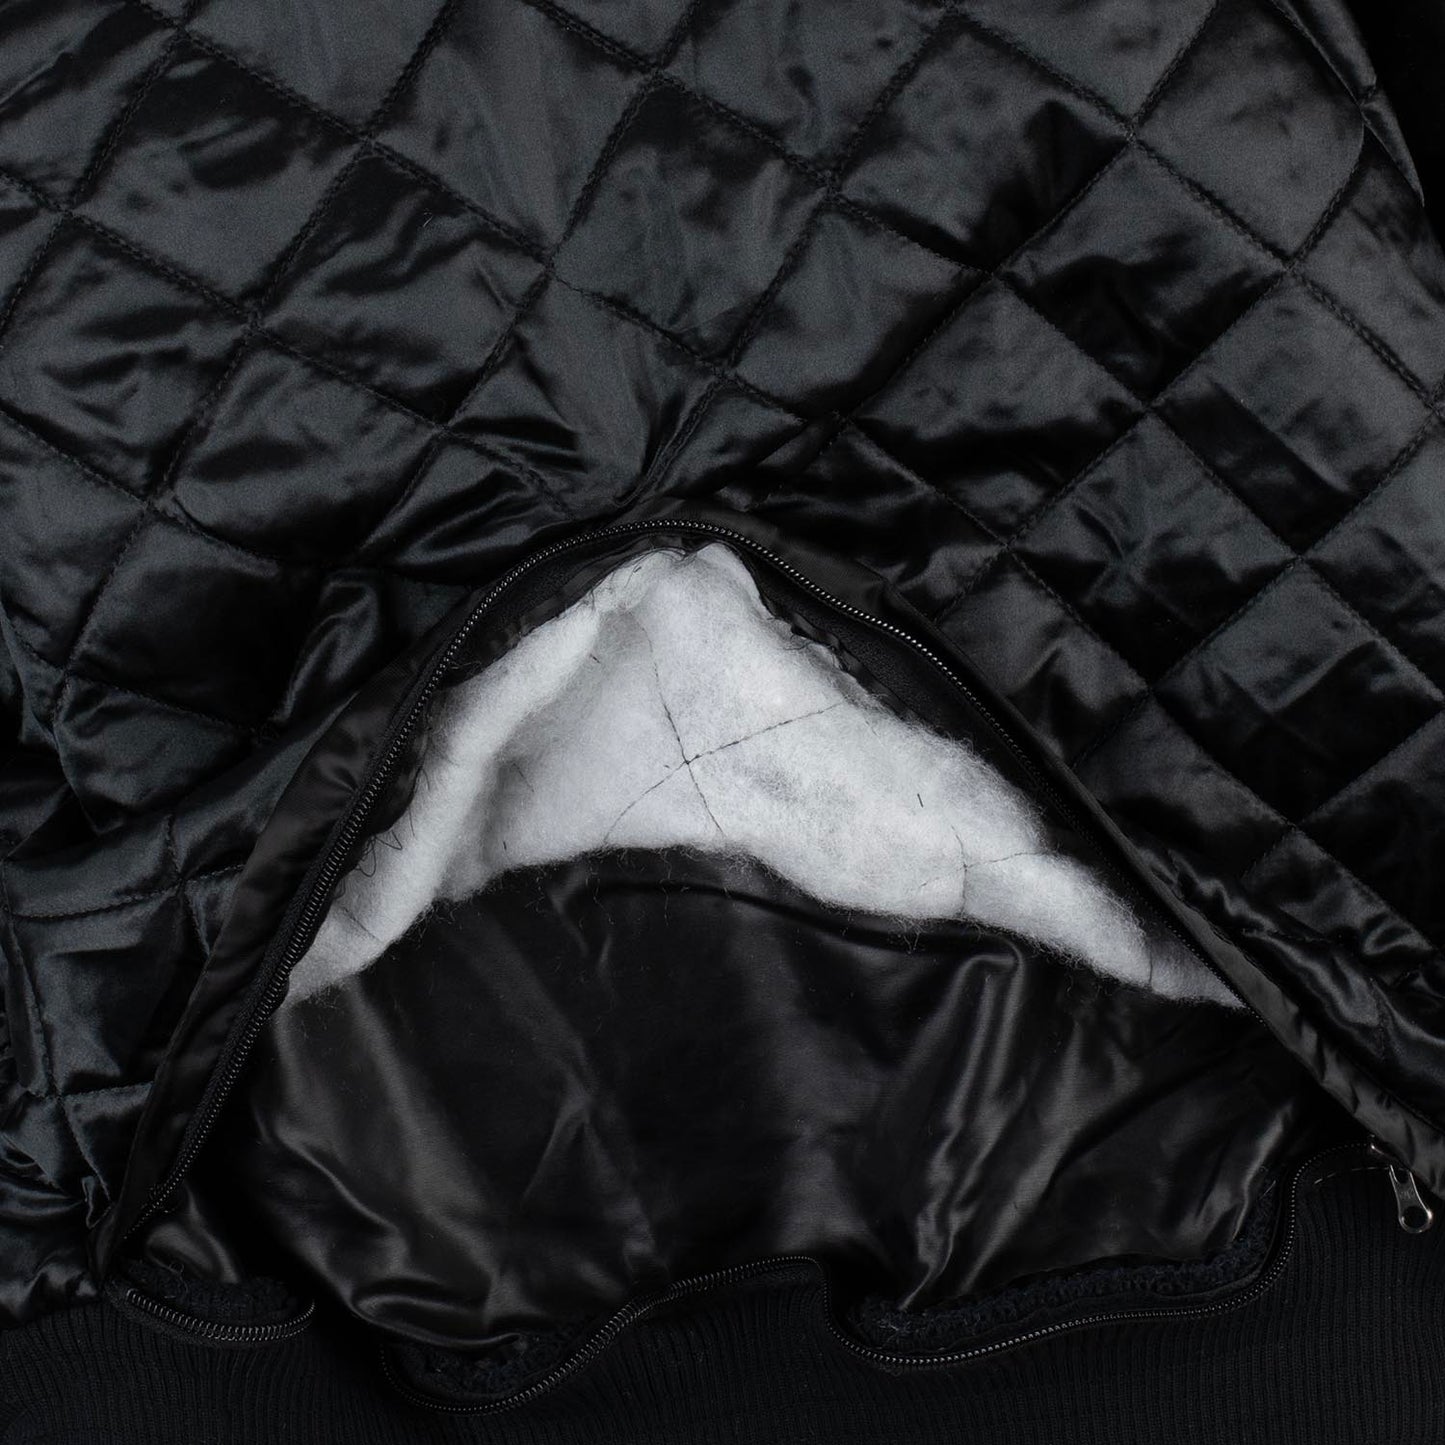 GIII Starter Rangers Exclusive Staple Satin Jacket In Black - Zoom View On Inside Material